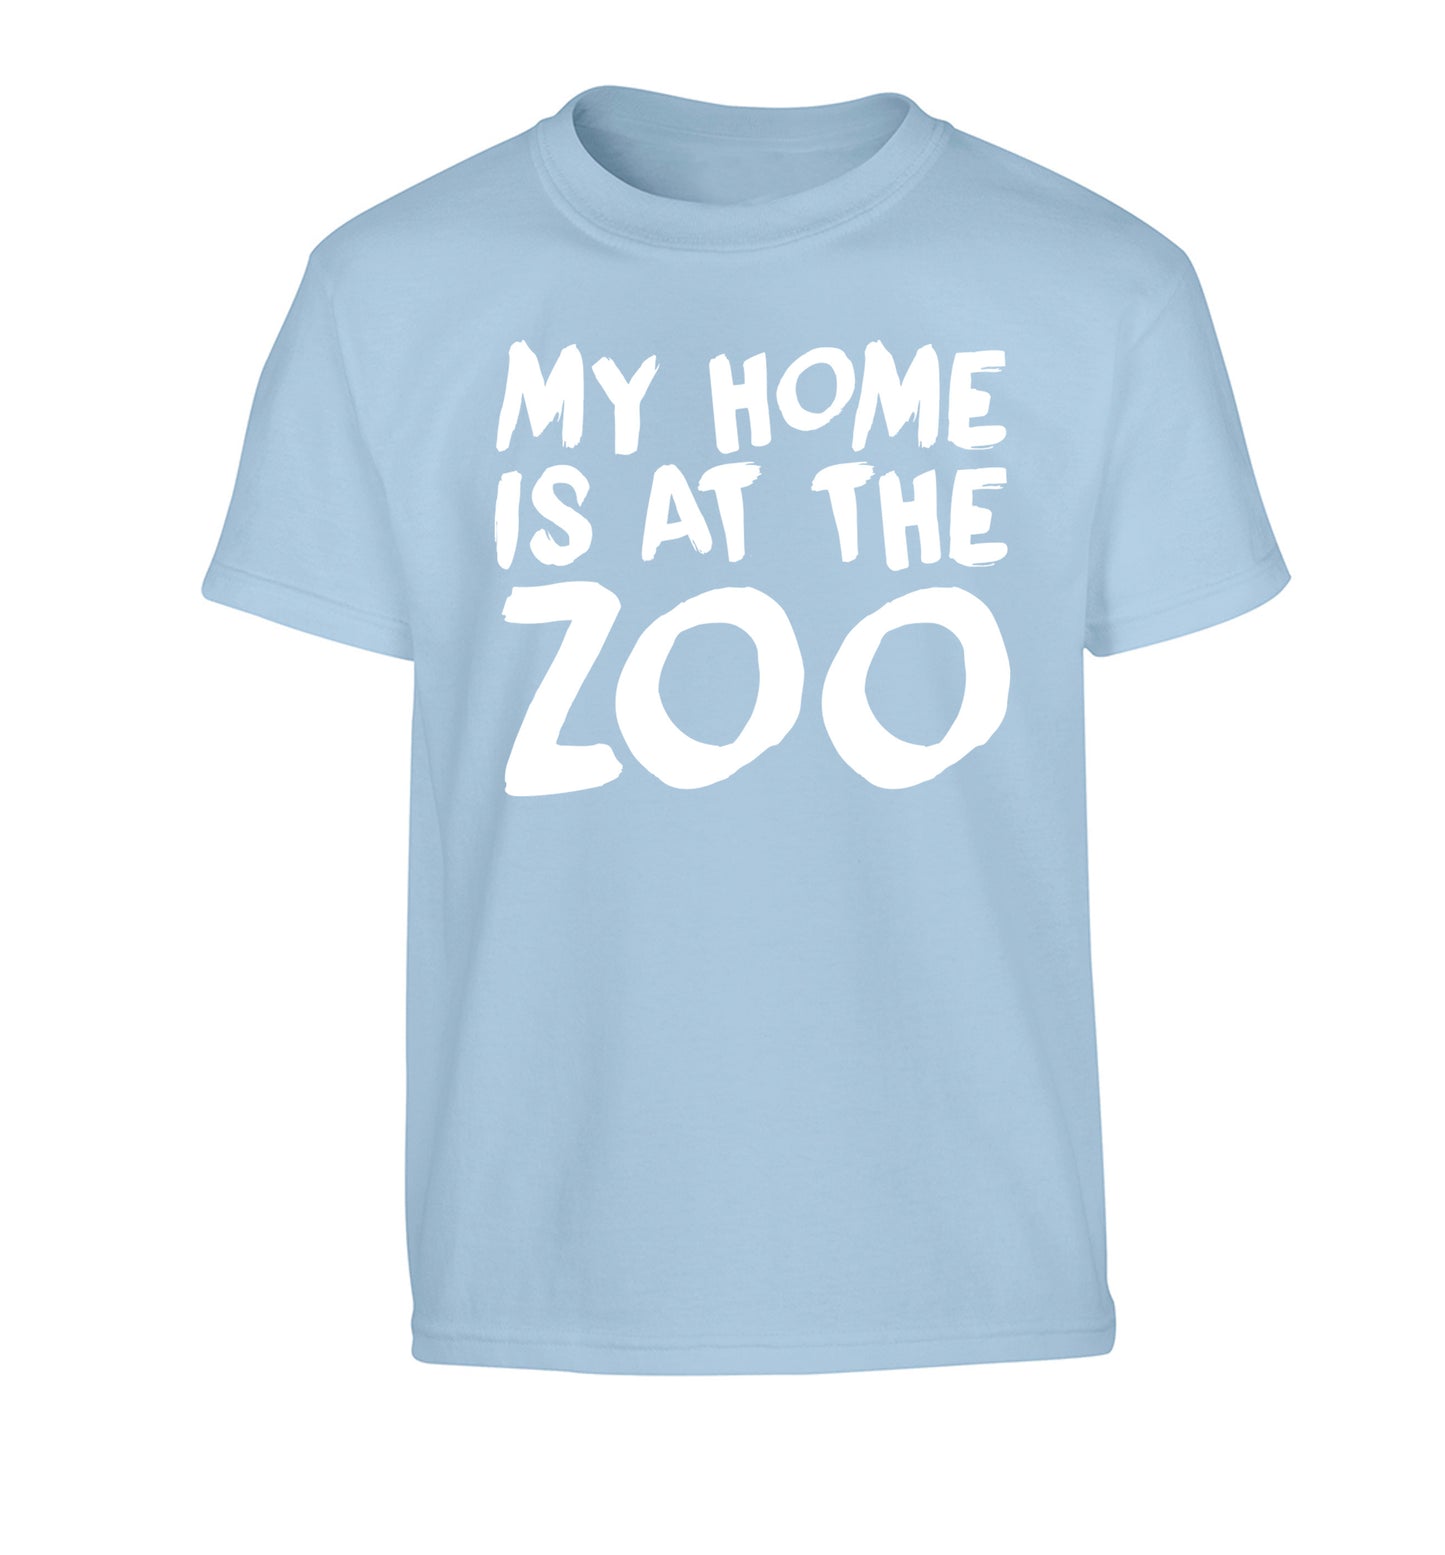 My home is at the zoo Children's light blue Tshirt 12-14 Years